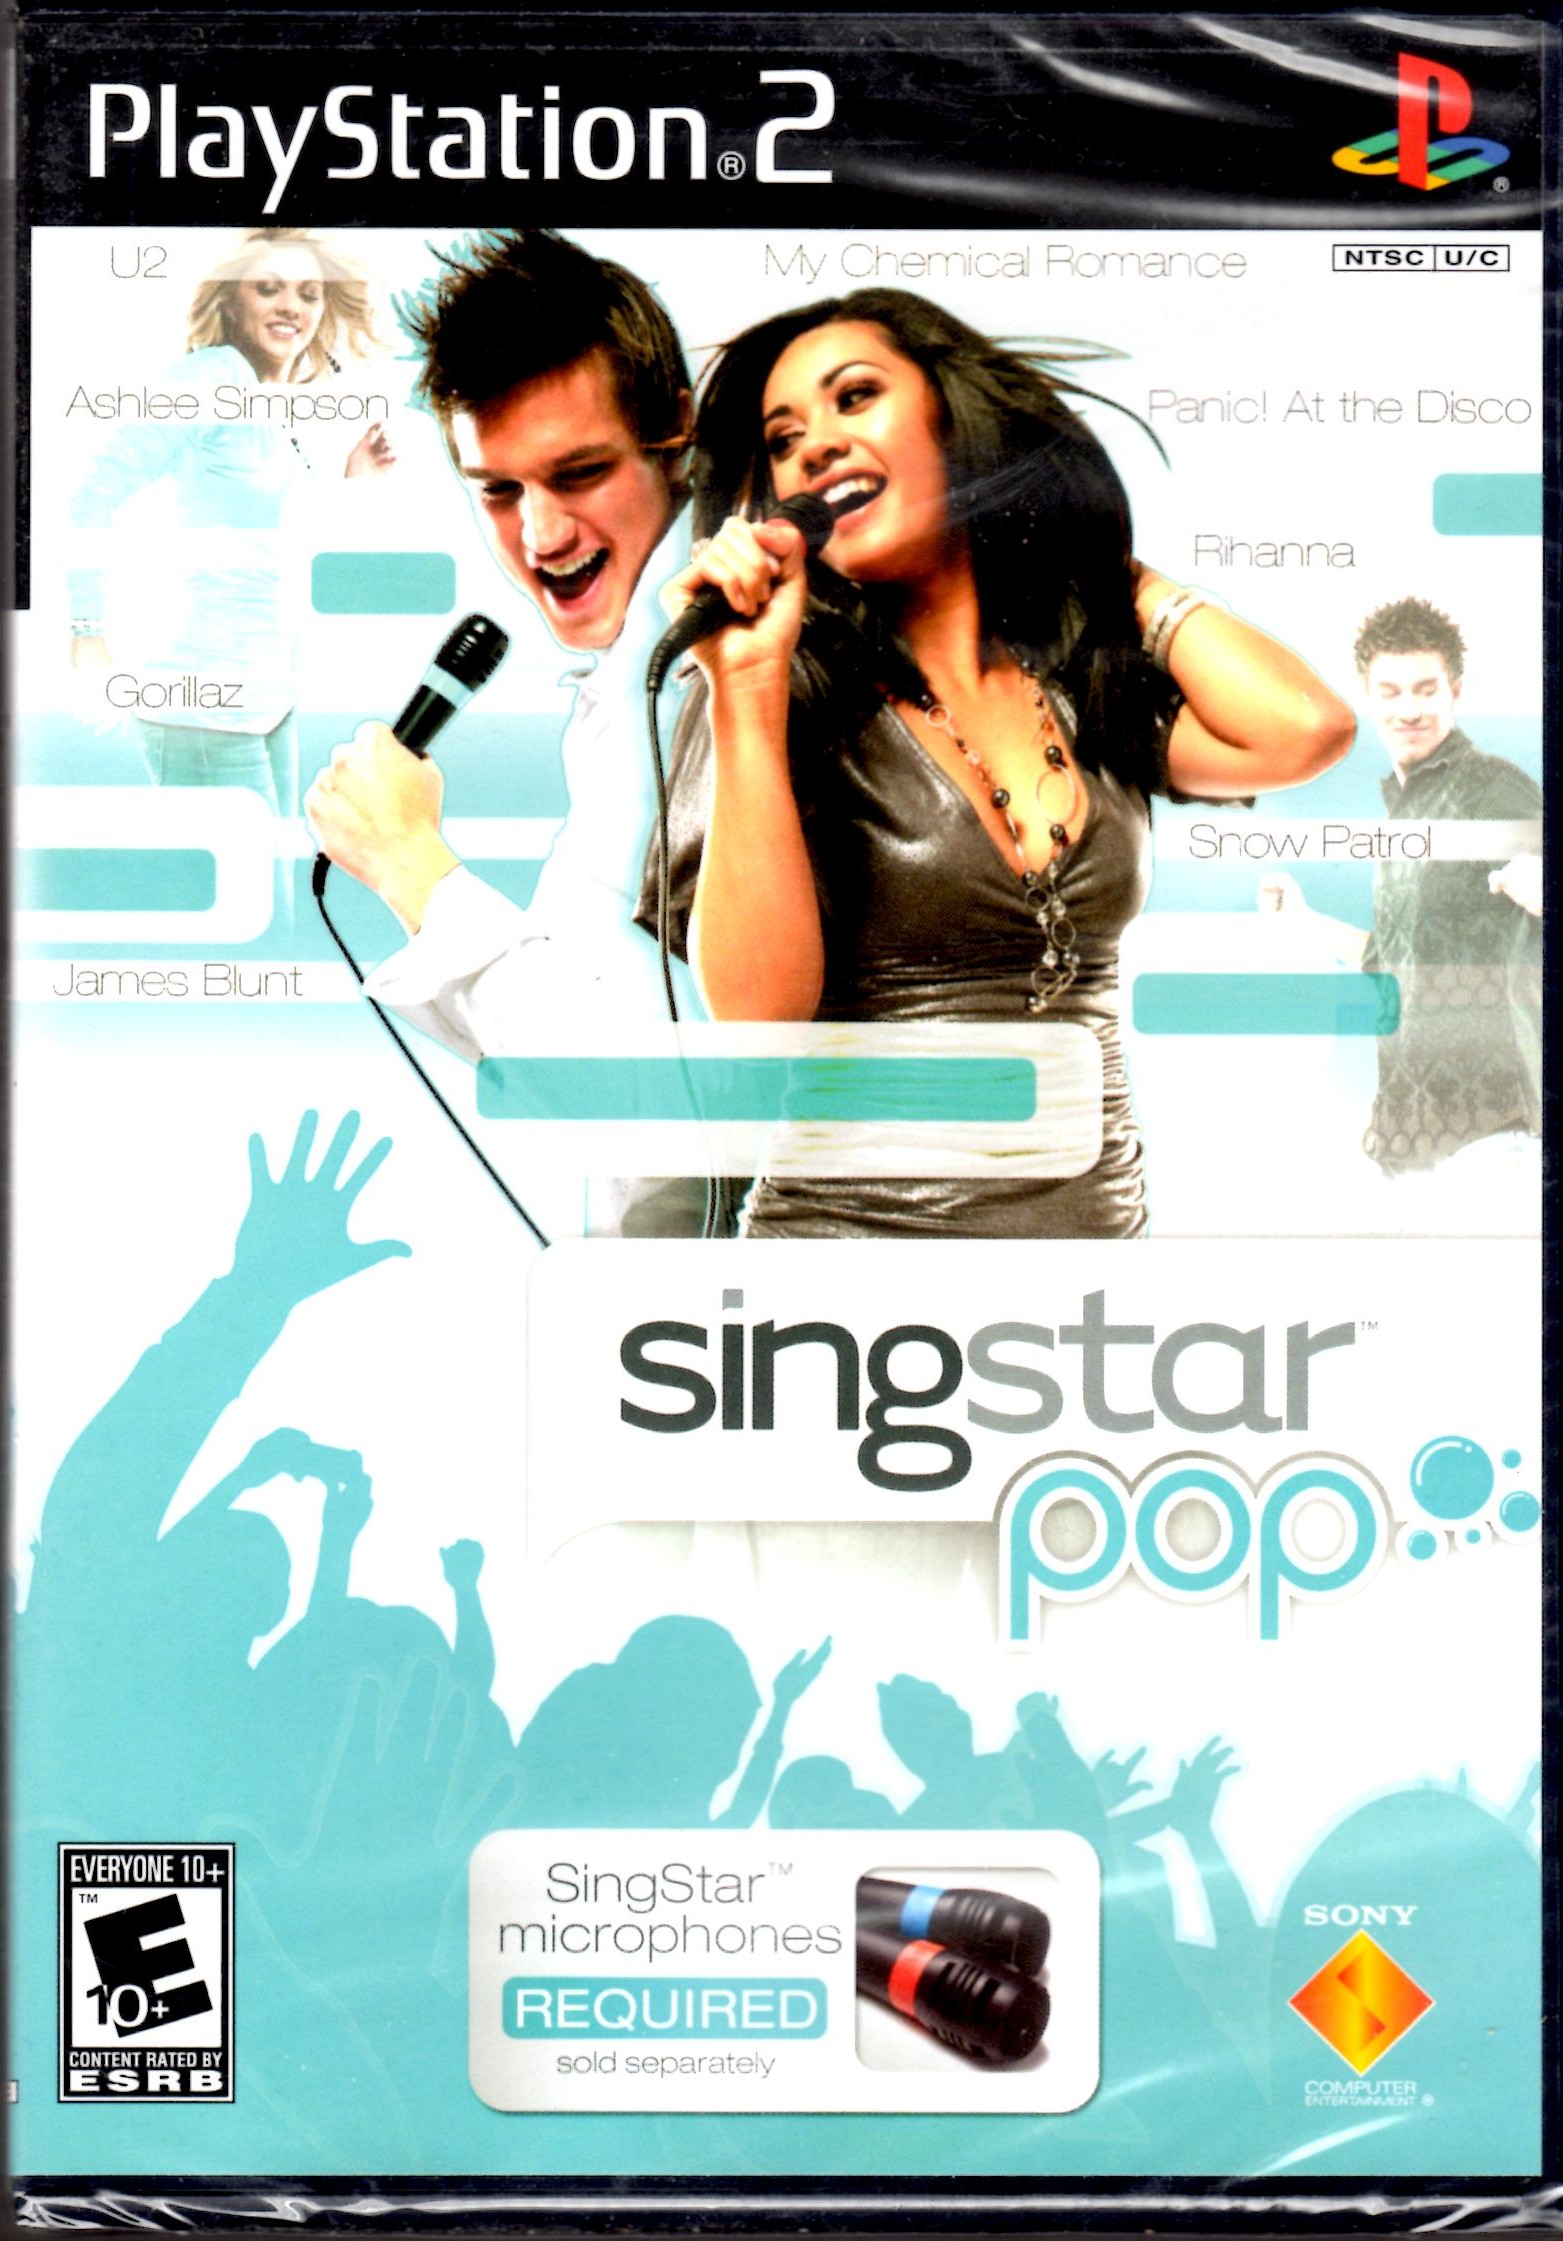 how do you get new singstar songs